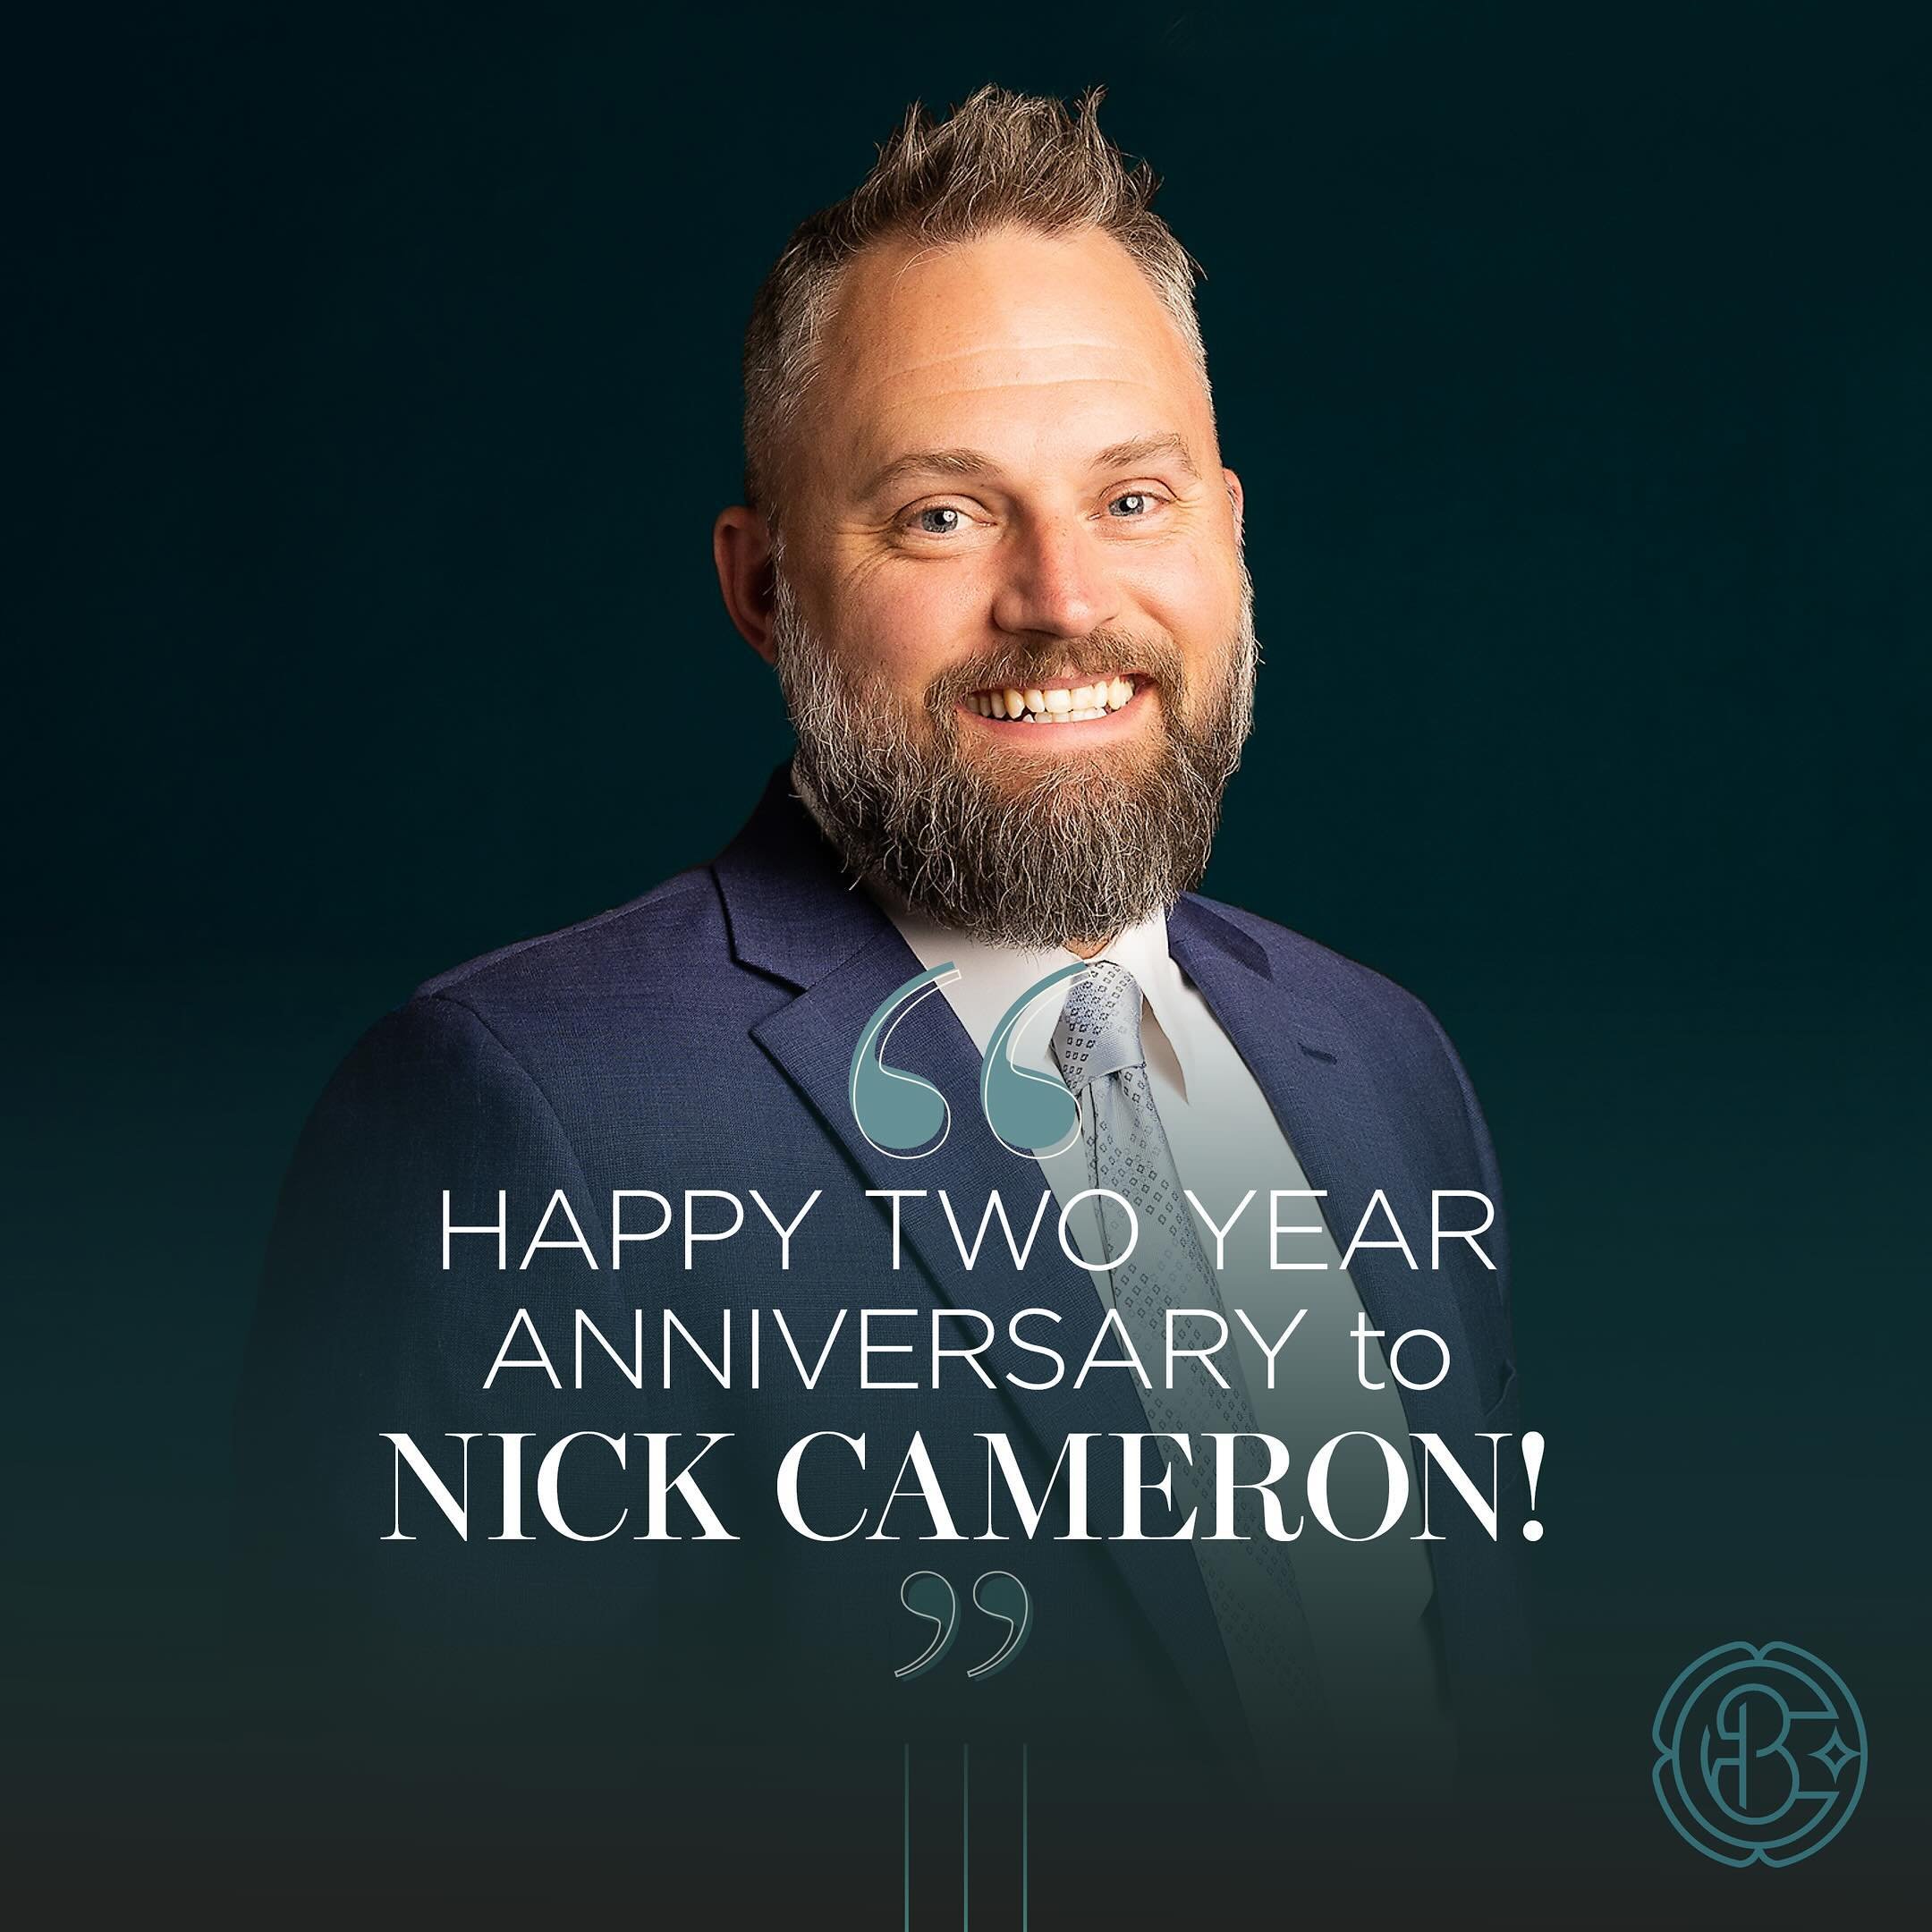 Happy 2-year Craft &amp; Bauerversary to our Senior Partner Nick Cameron!⁠
⁠
His philosophy is to take a very personal approach, putting his clients&rsquo; interests above all else and &ldquo;negotiating for them as if it were my money and my parents